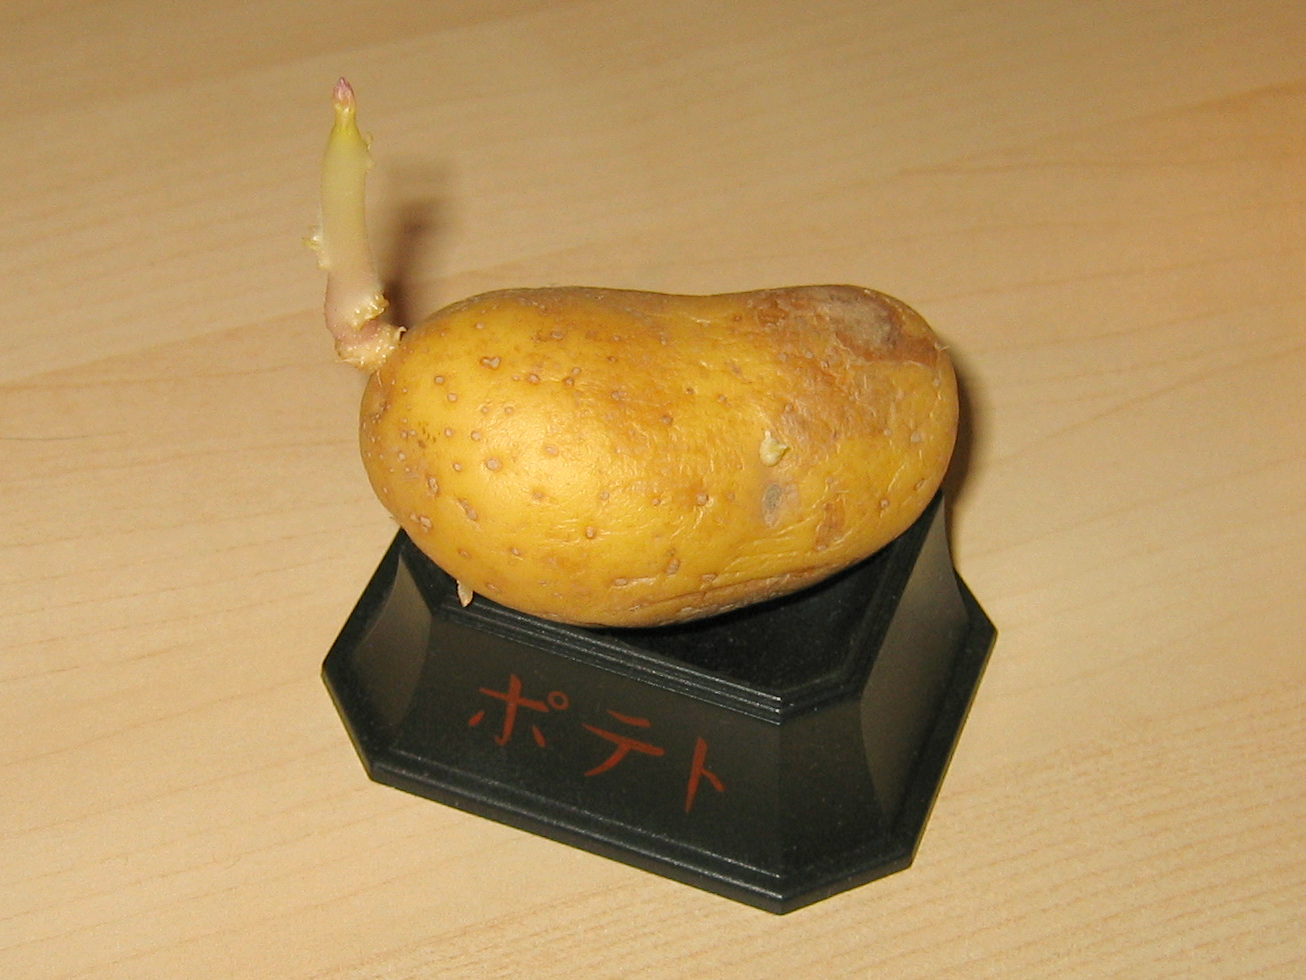 A potato tuber with a shoot growing out of one of the nodes